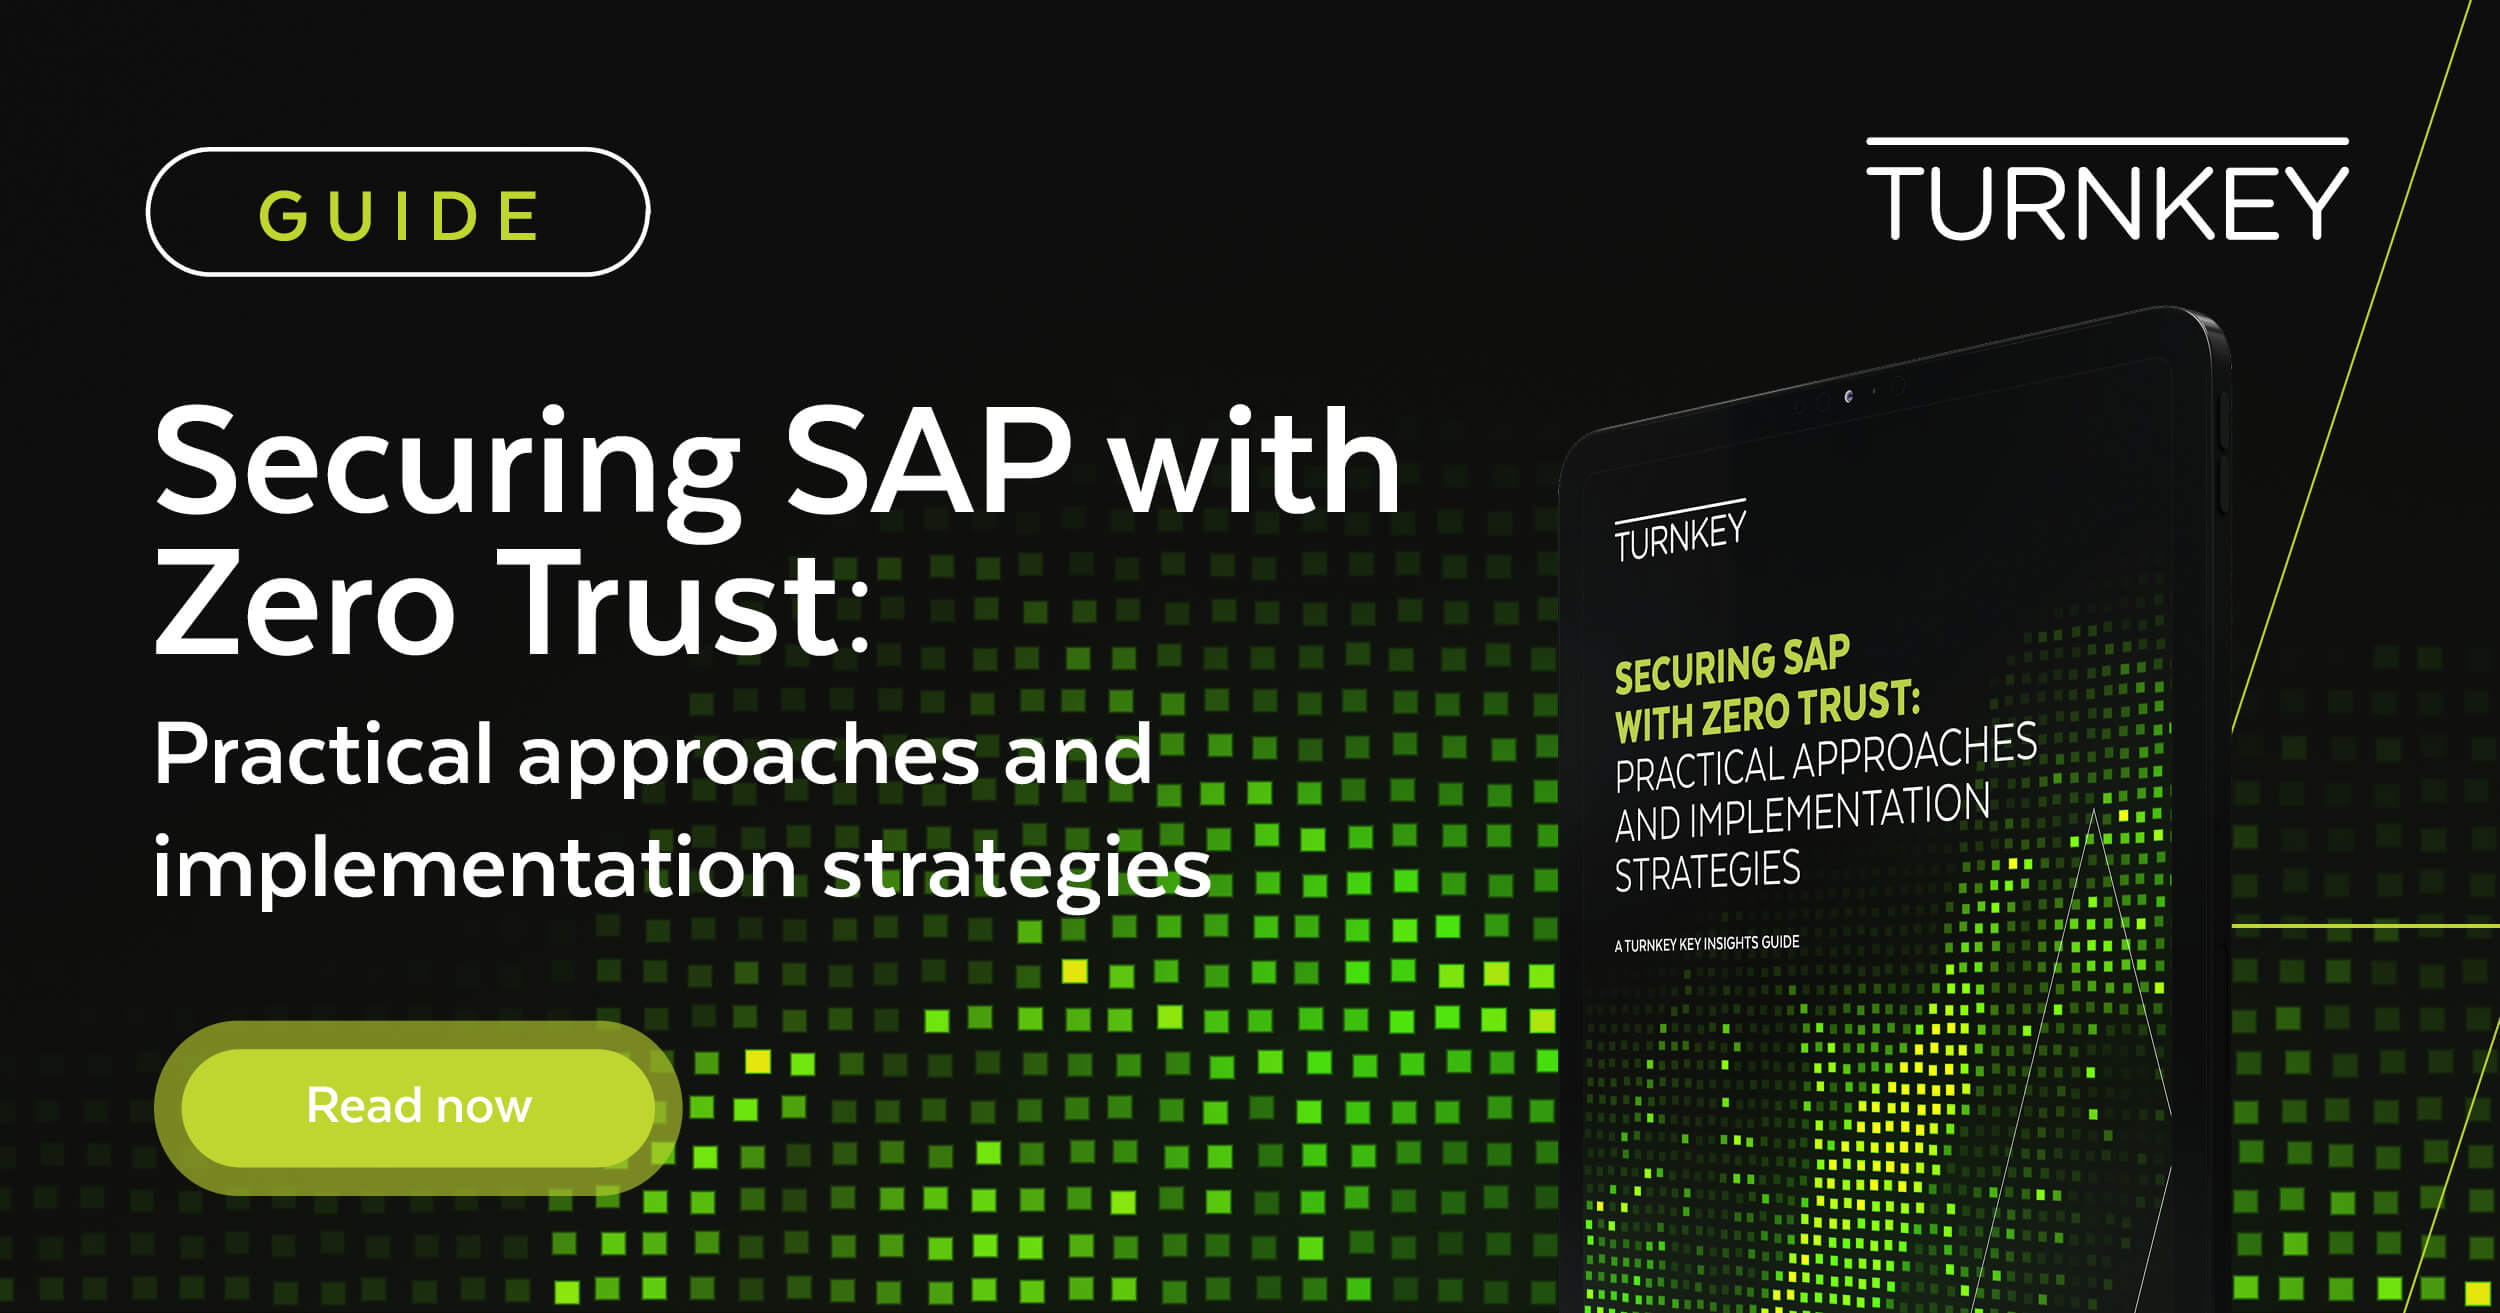 Turnkey Securing SAP with Zero Trust- practical approaches and implementation strategies 2023 12x4 12x6754